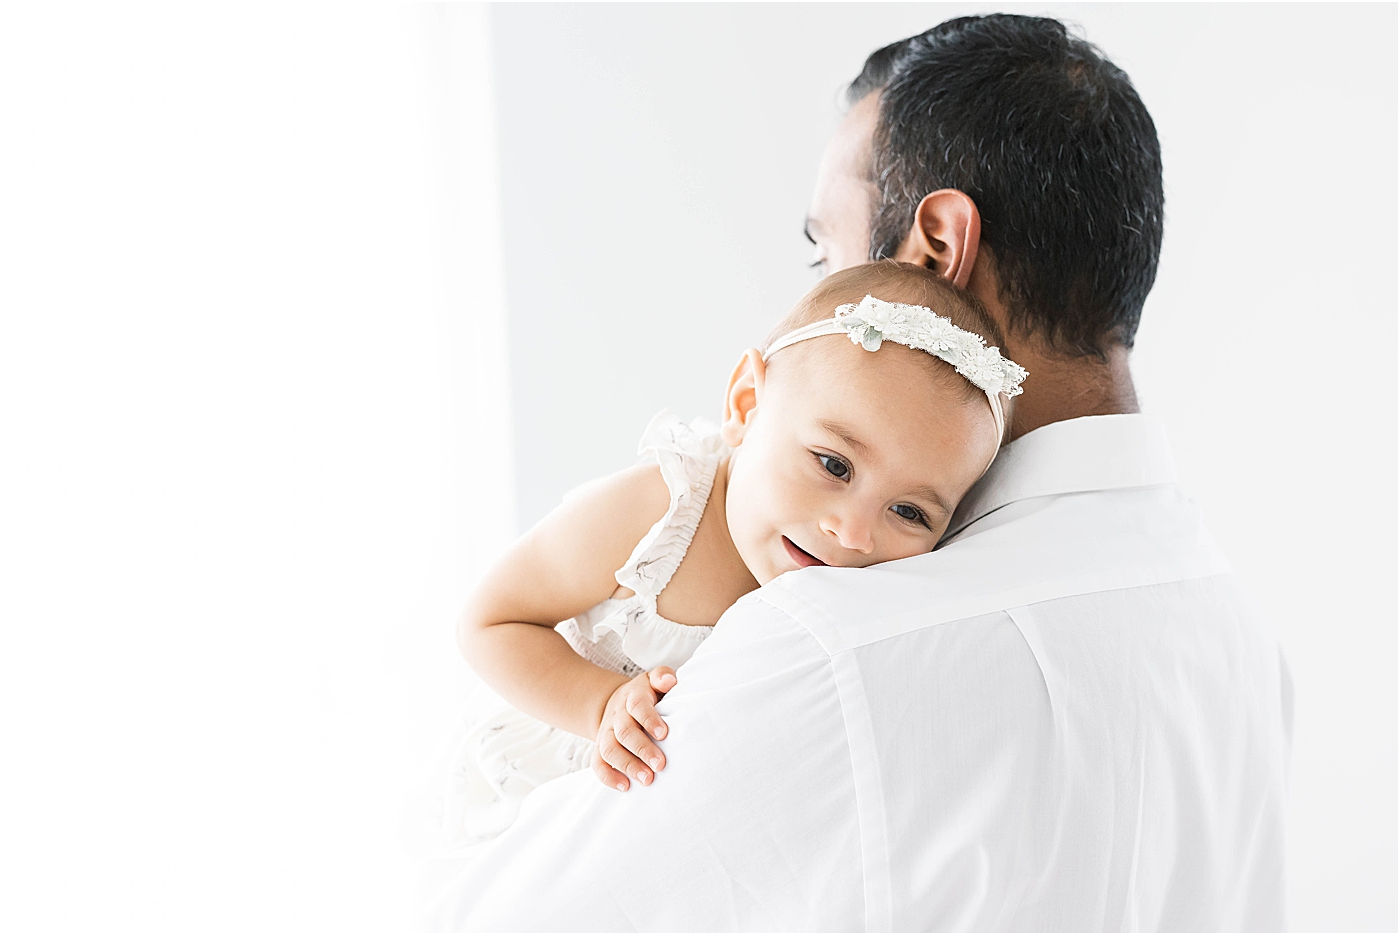 Father-daughter photos during first birthday session for baby girl | Lindsay Konopa Photography